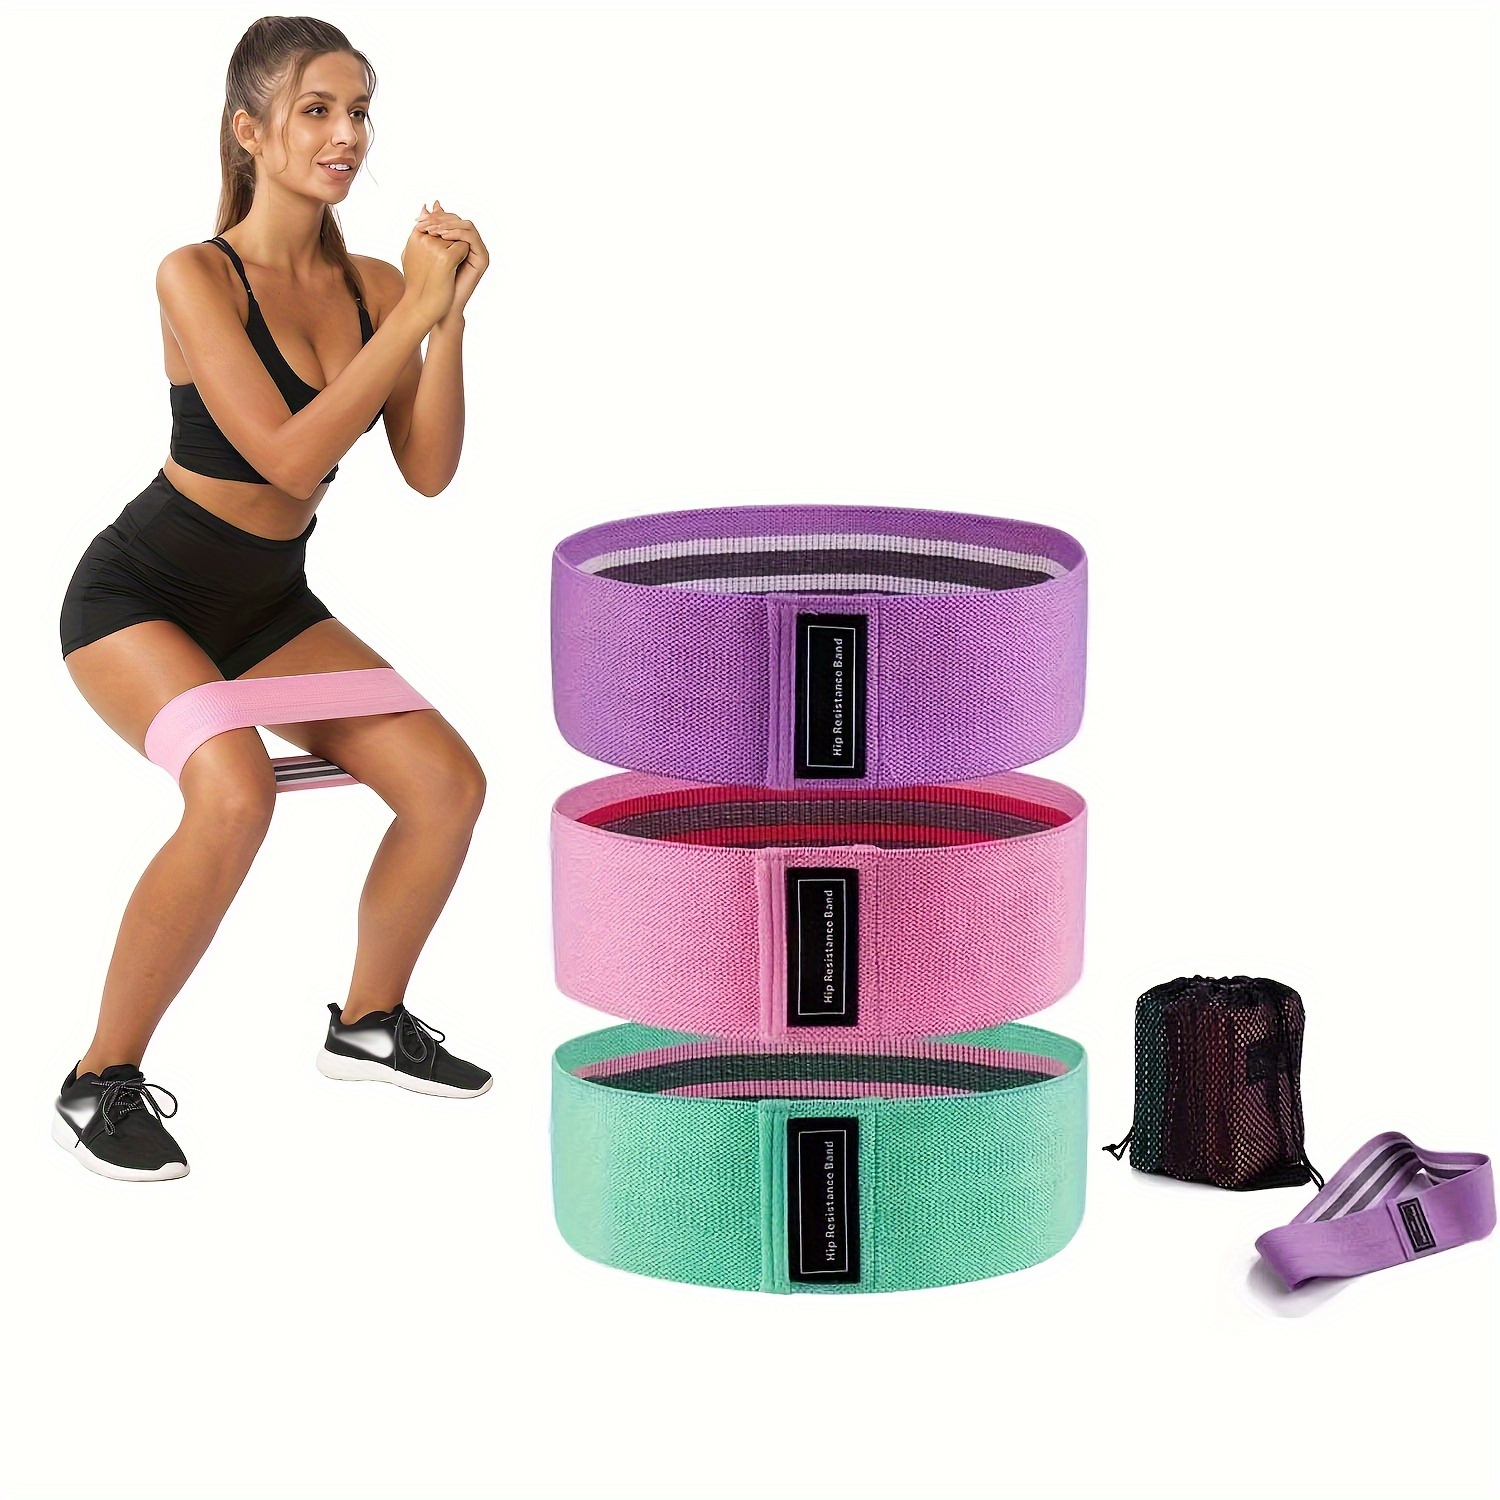 3pcs Yoga Gym Exercise Fitness Elastic Hip Fabric Resistance Bands